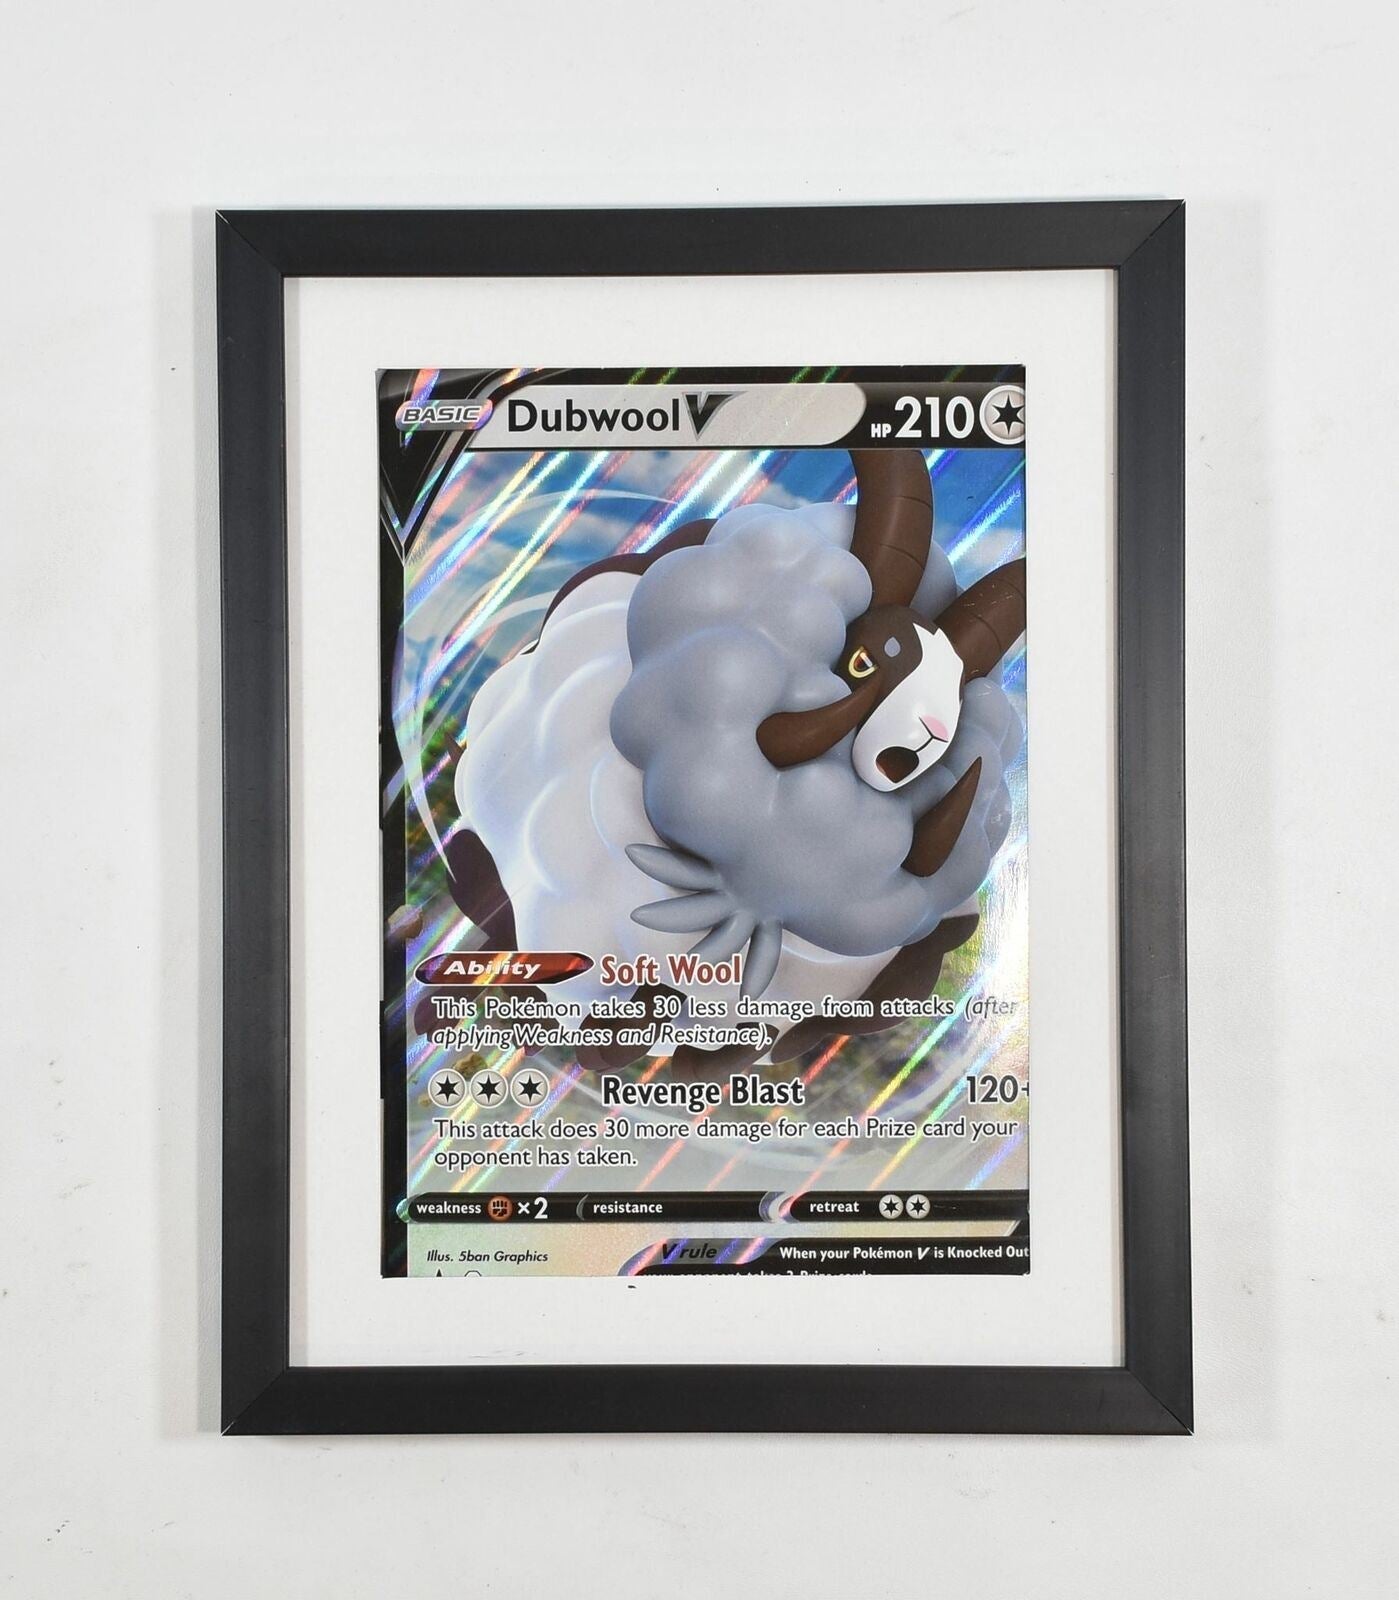 Dubwool promo Pokemon Card Limited edition Framed 5x7 2020